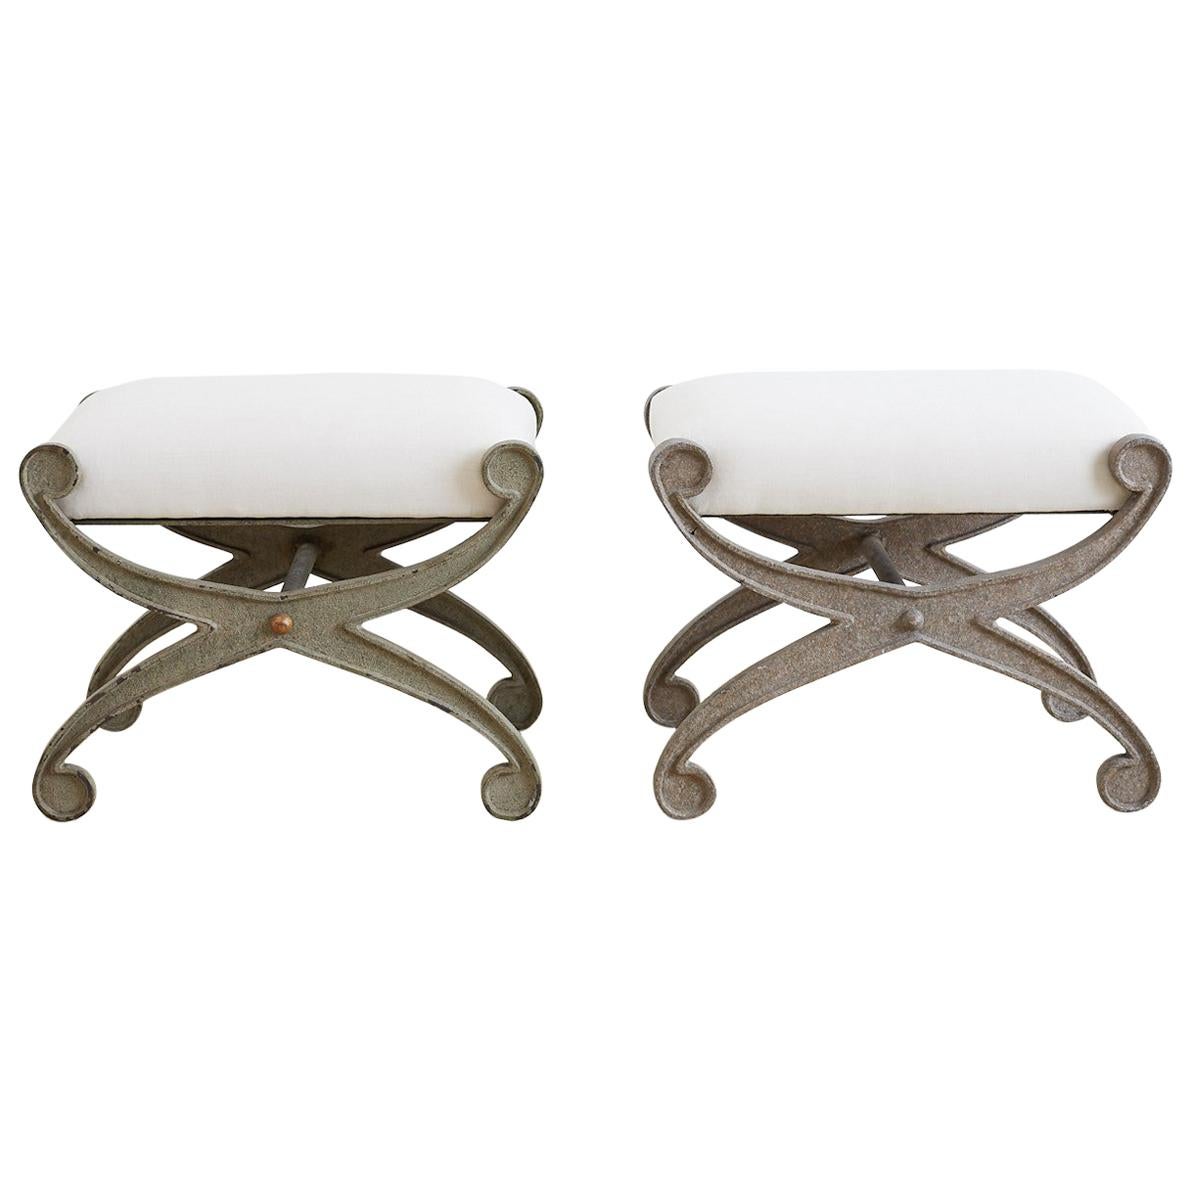 Pair of Curule Iron Benches or Stools